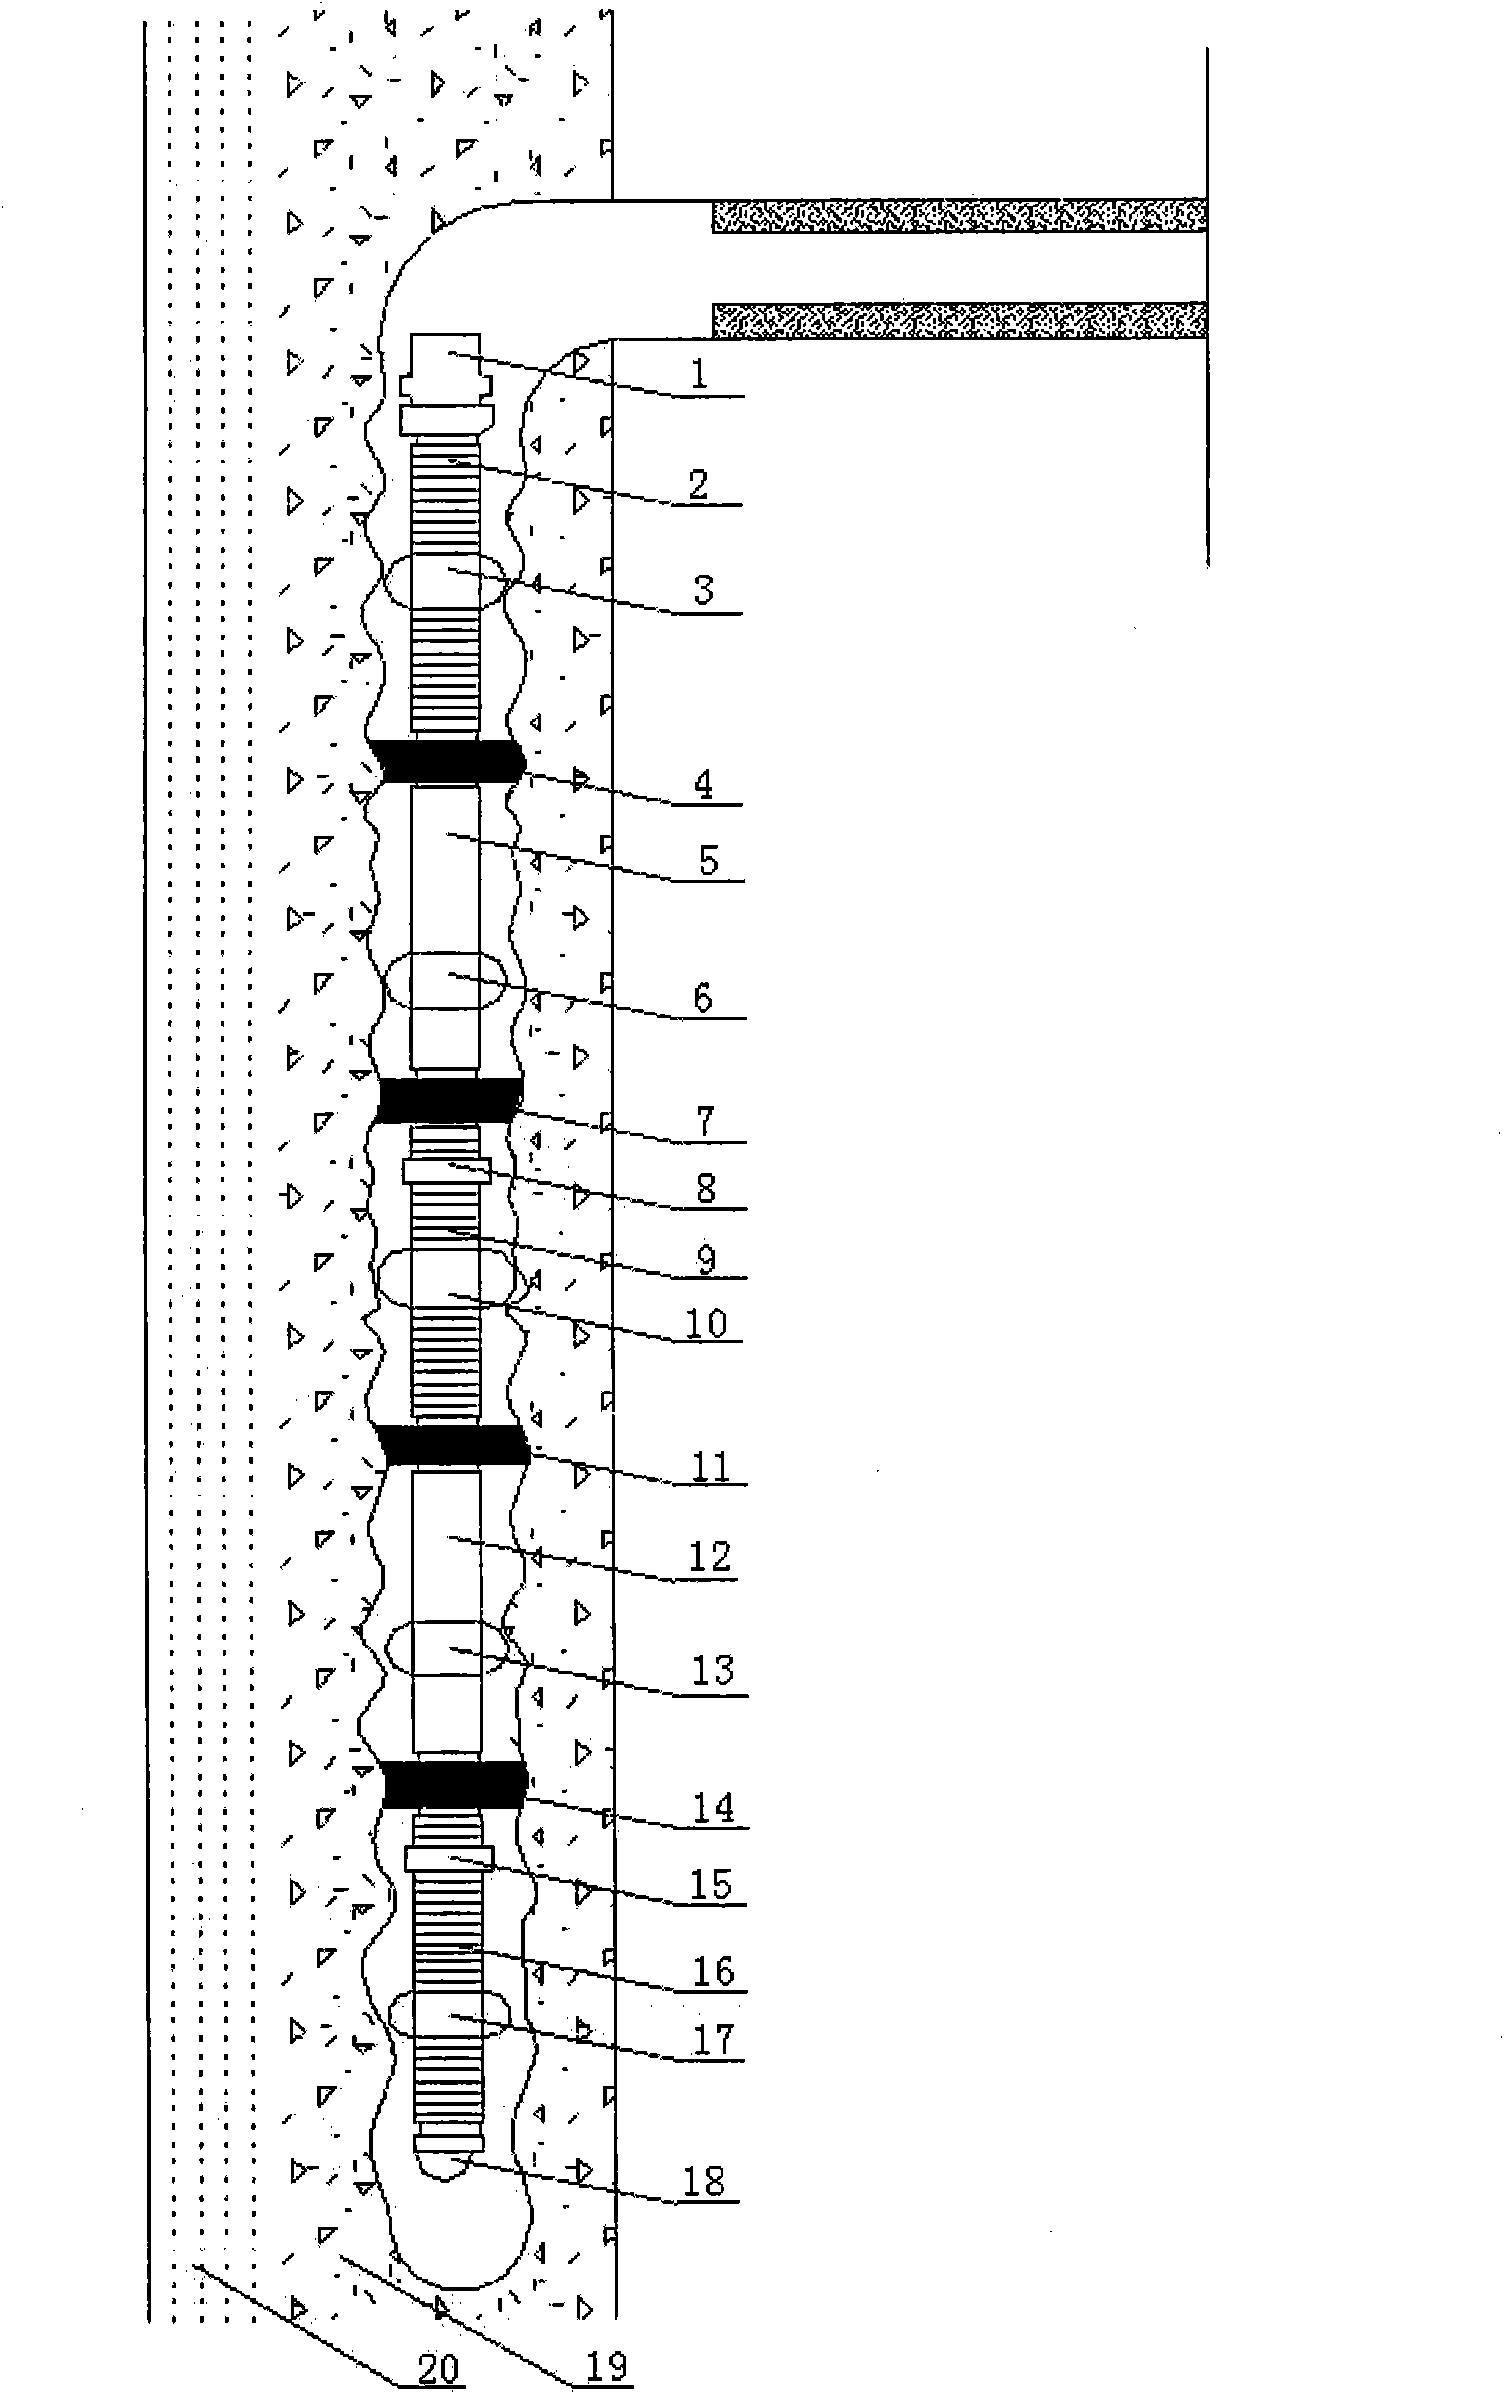 Subsection well completion system of bottom water reservoir horizontal well